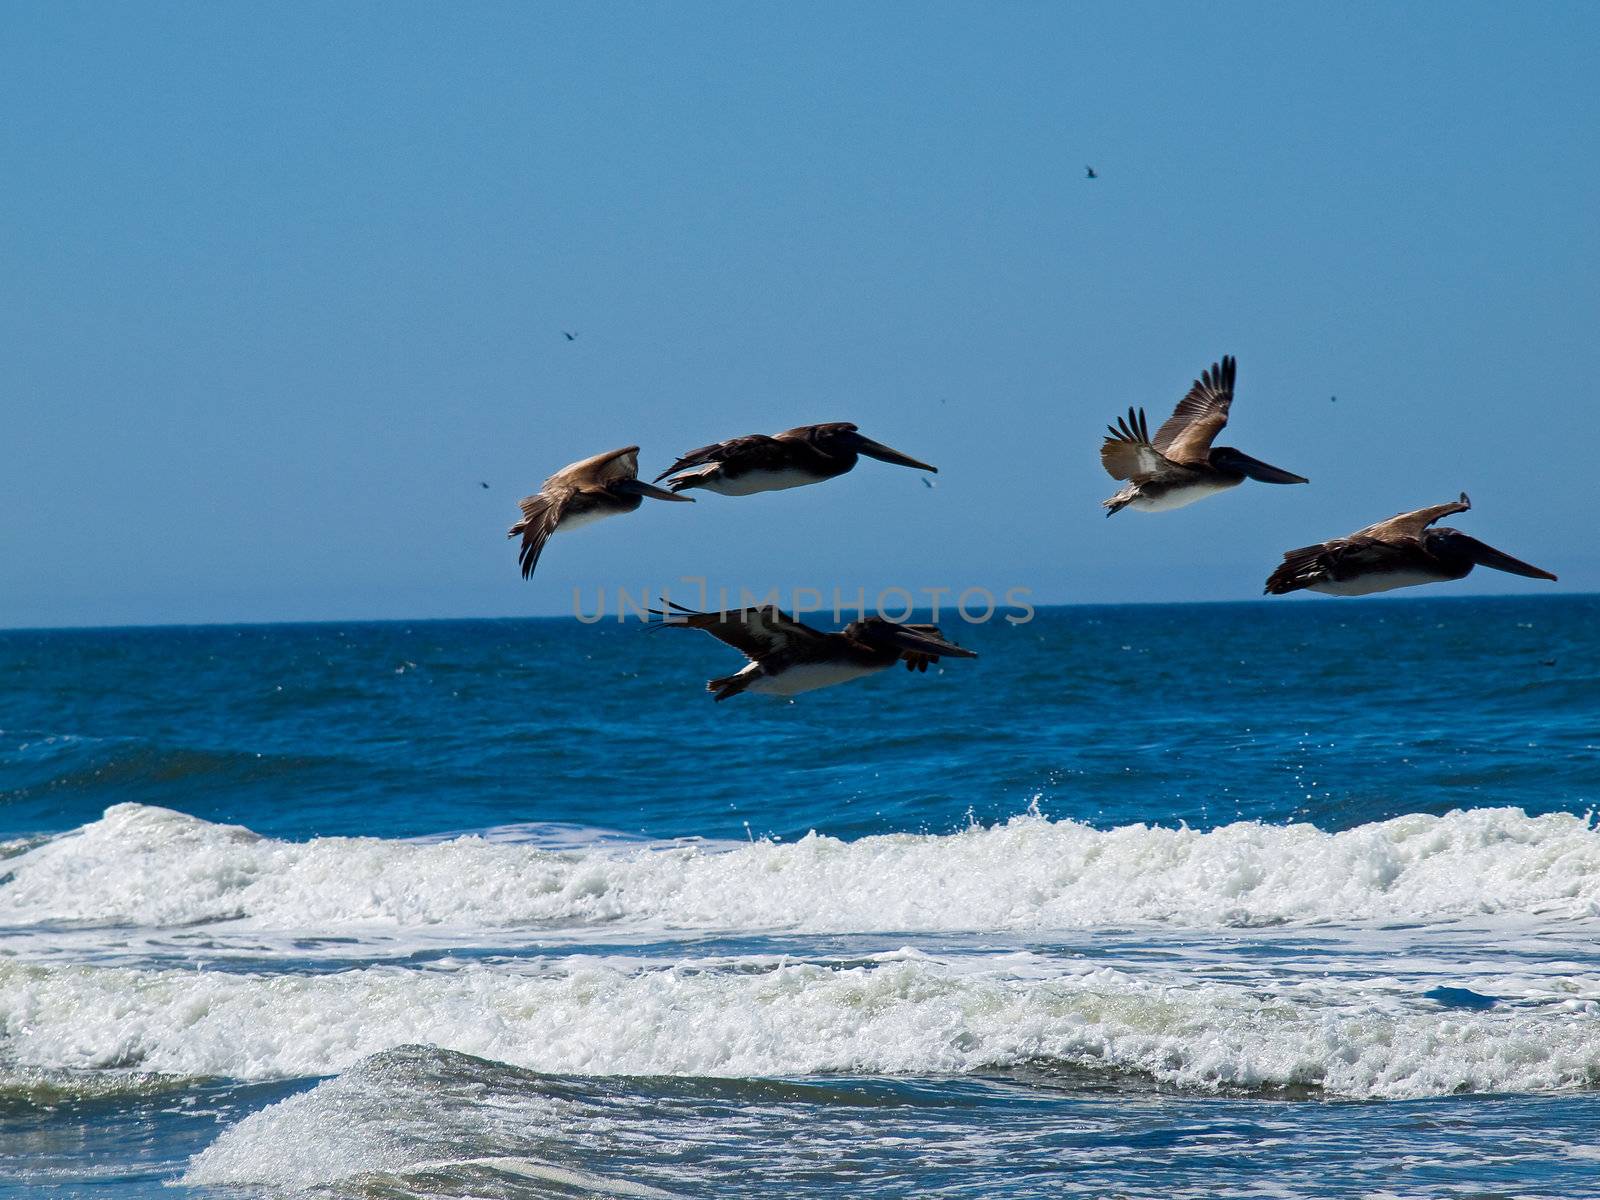 A Variety of Seabirds at the Seashore Featuring Pelicans by Frankljunior